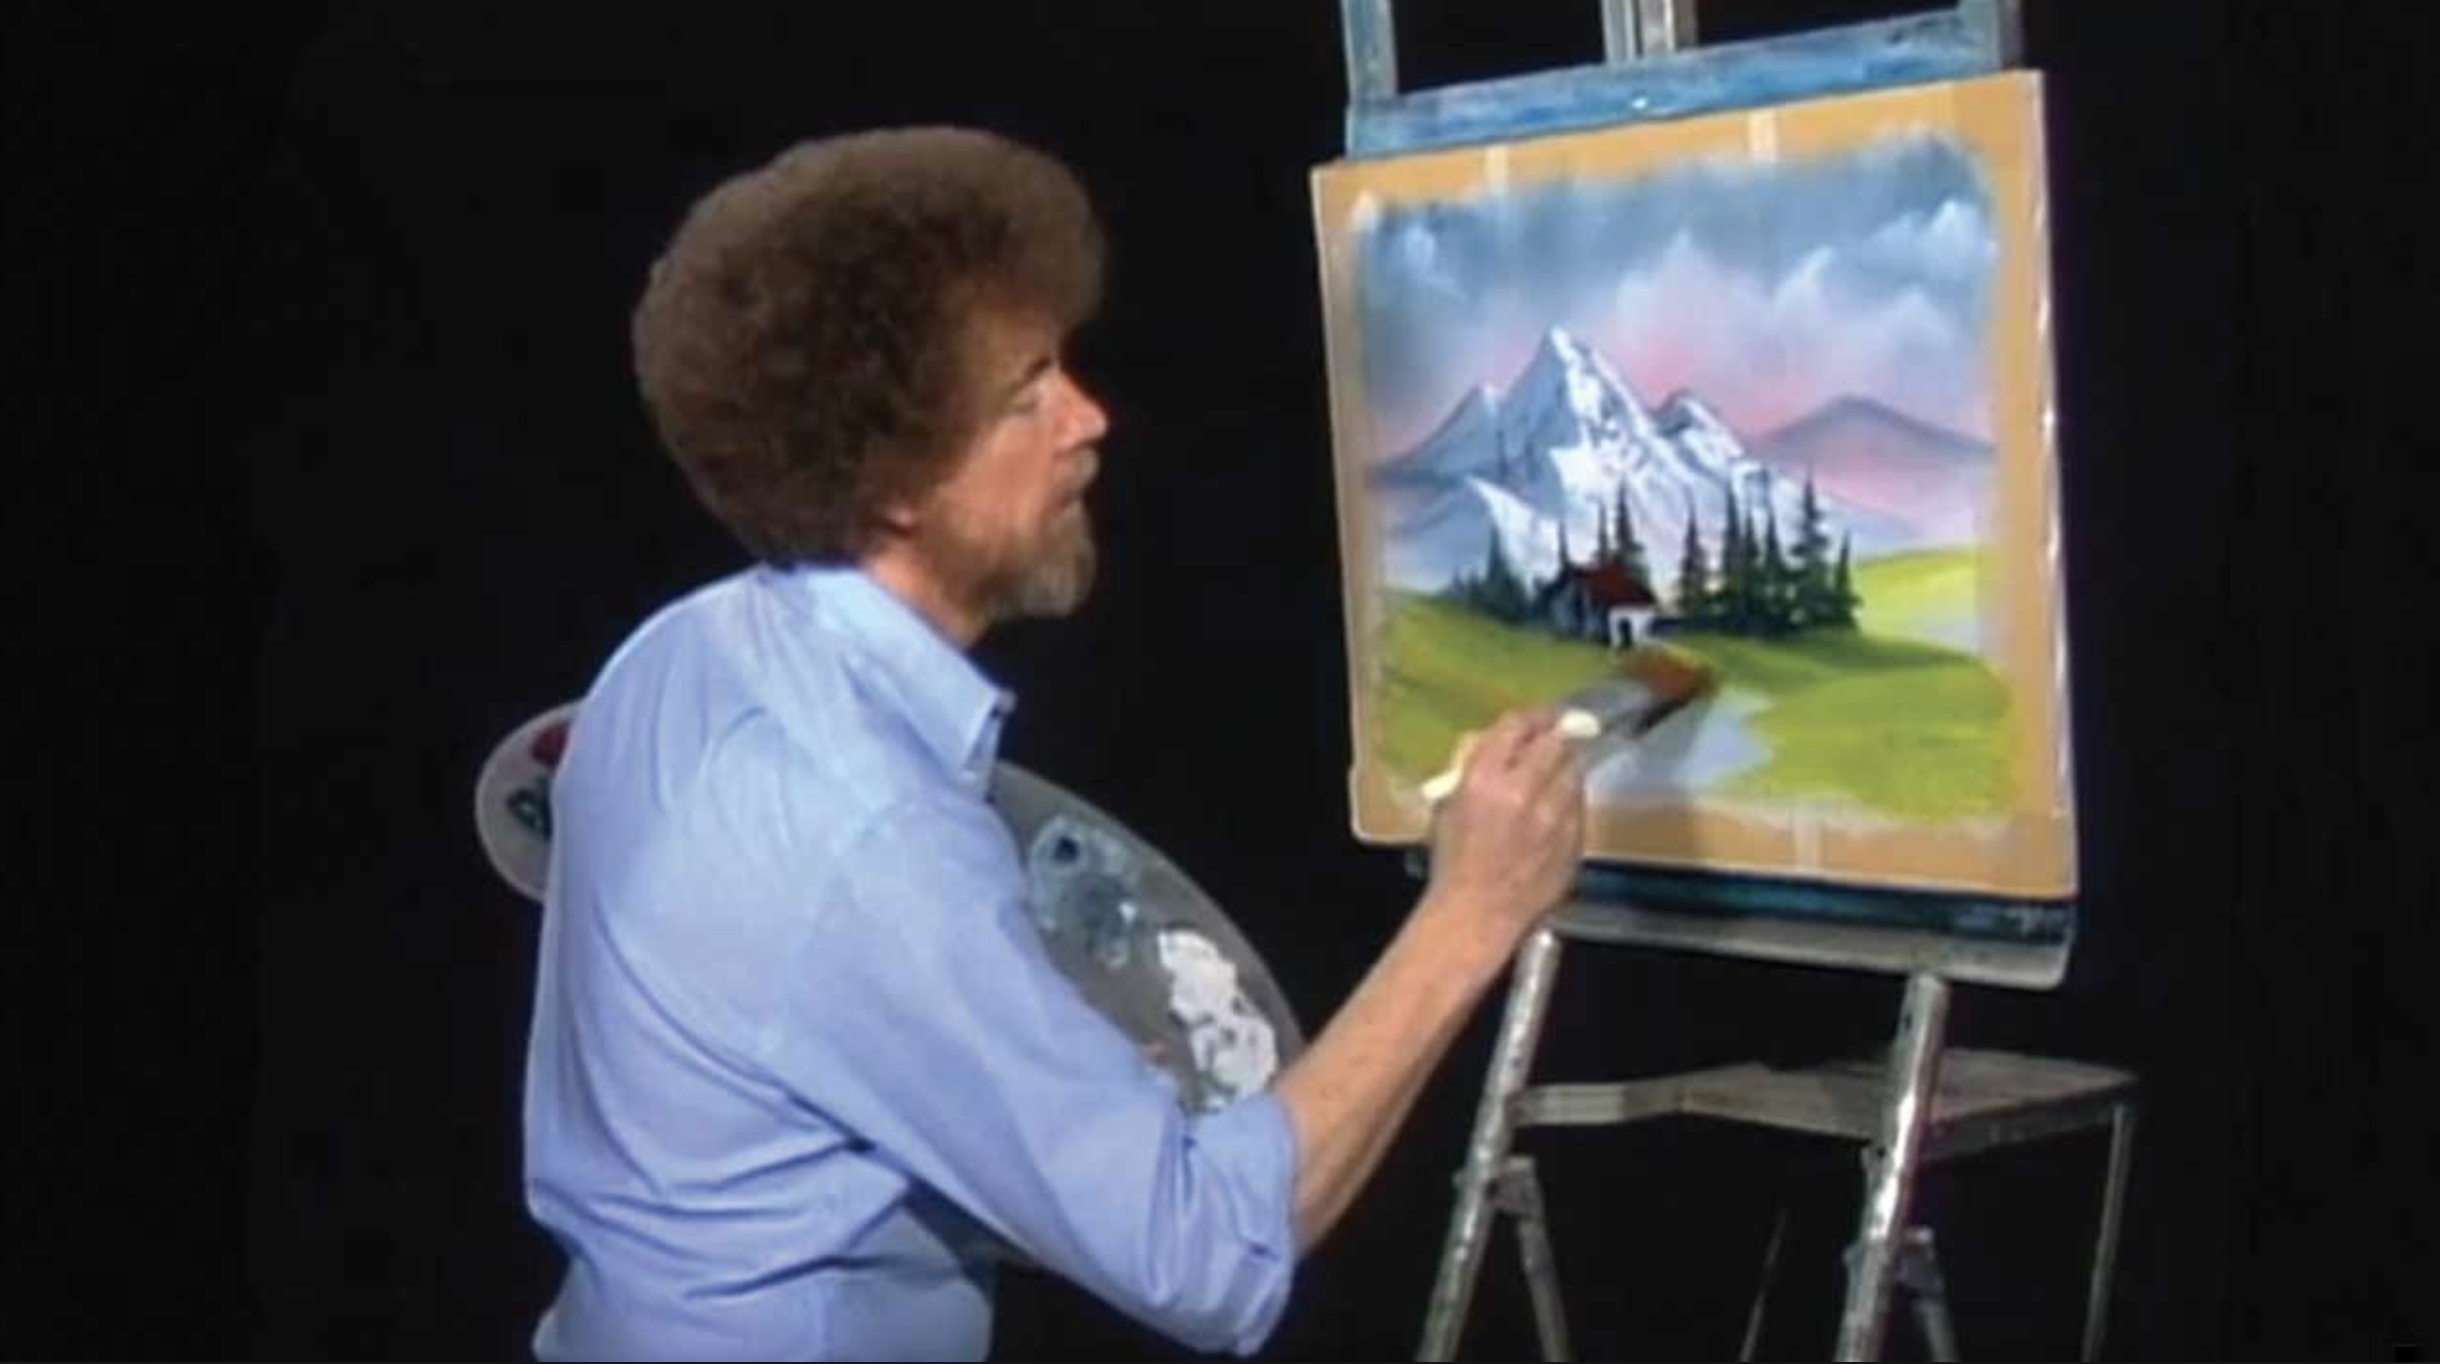 Bob Ross The Happy Painter To Air On Woub Hd August 5 Woub Public Media